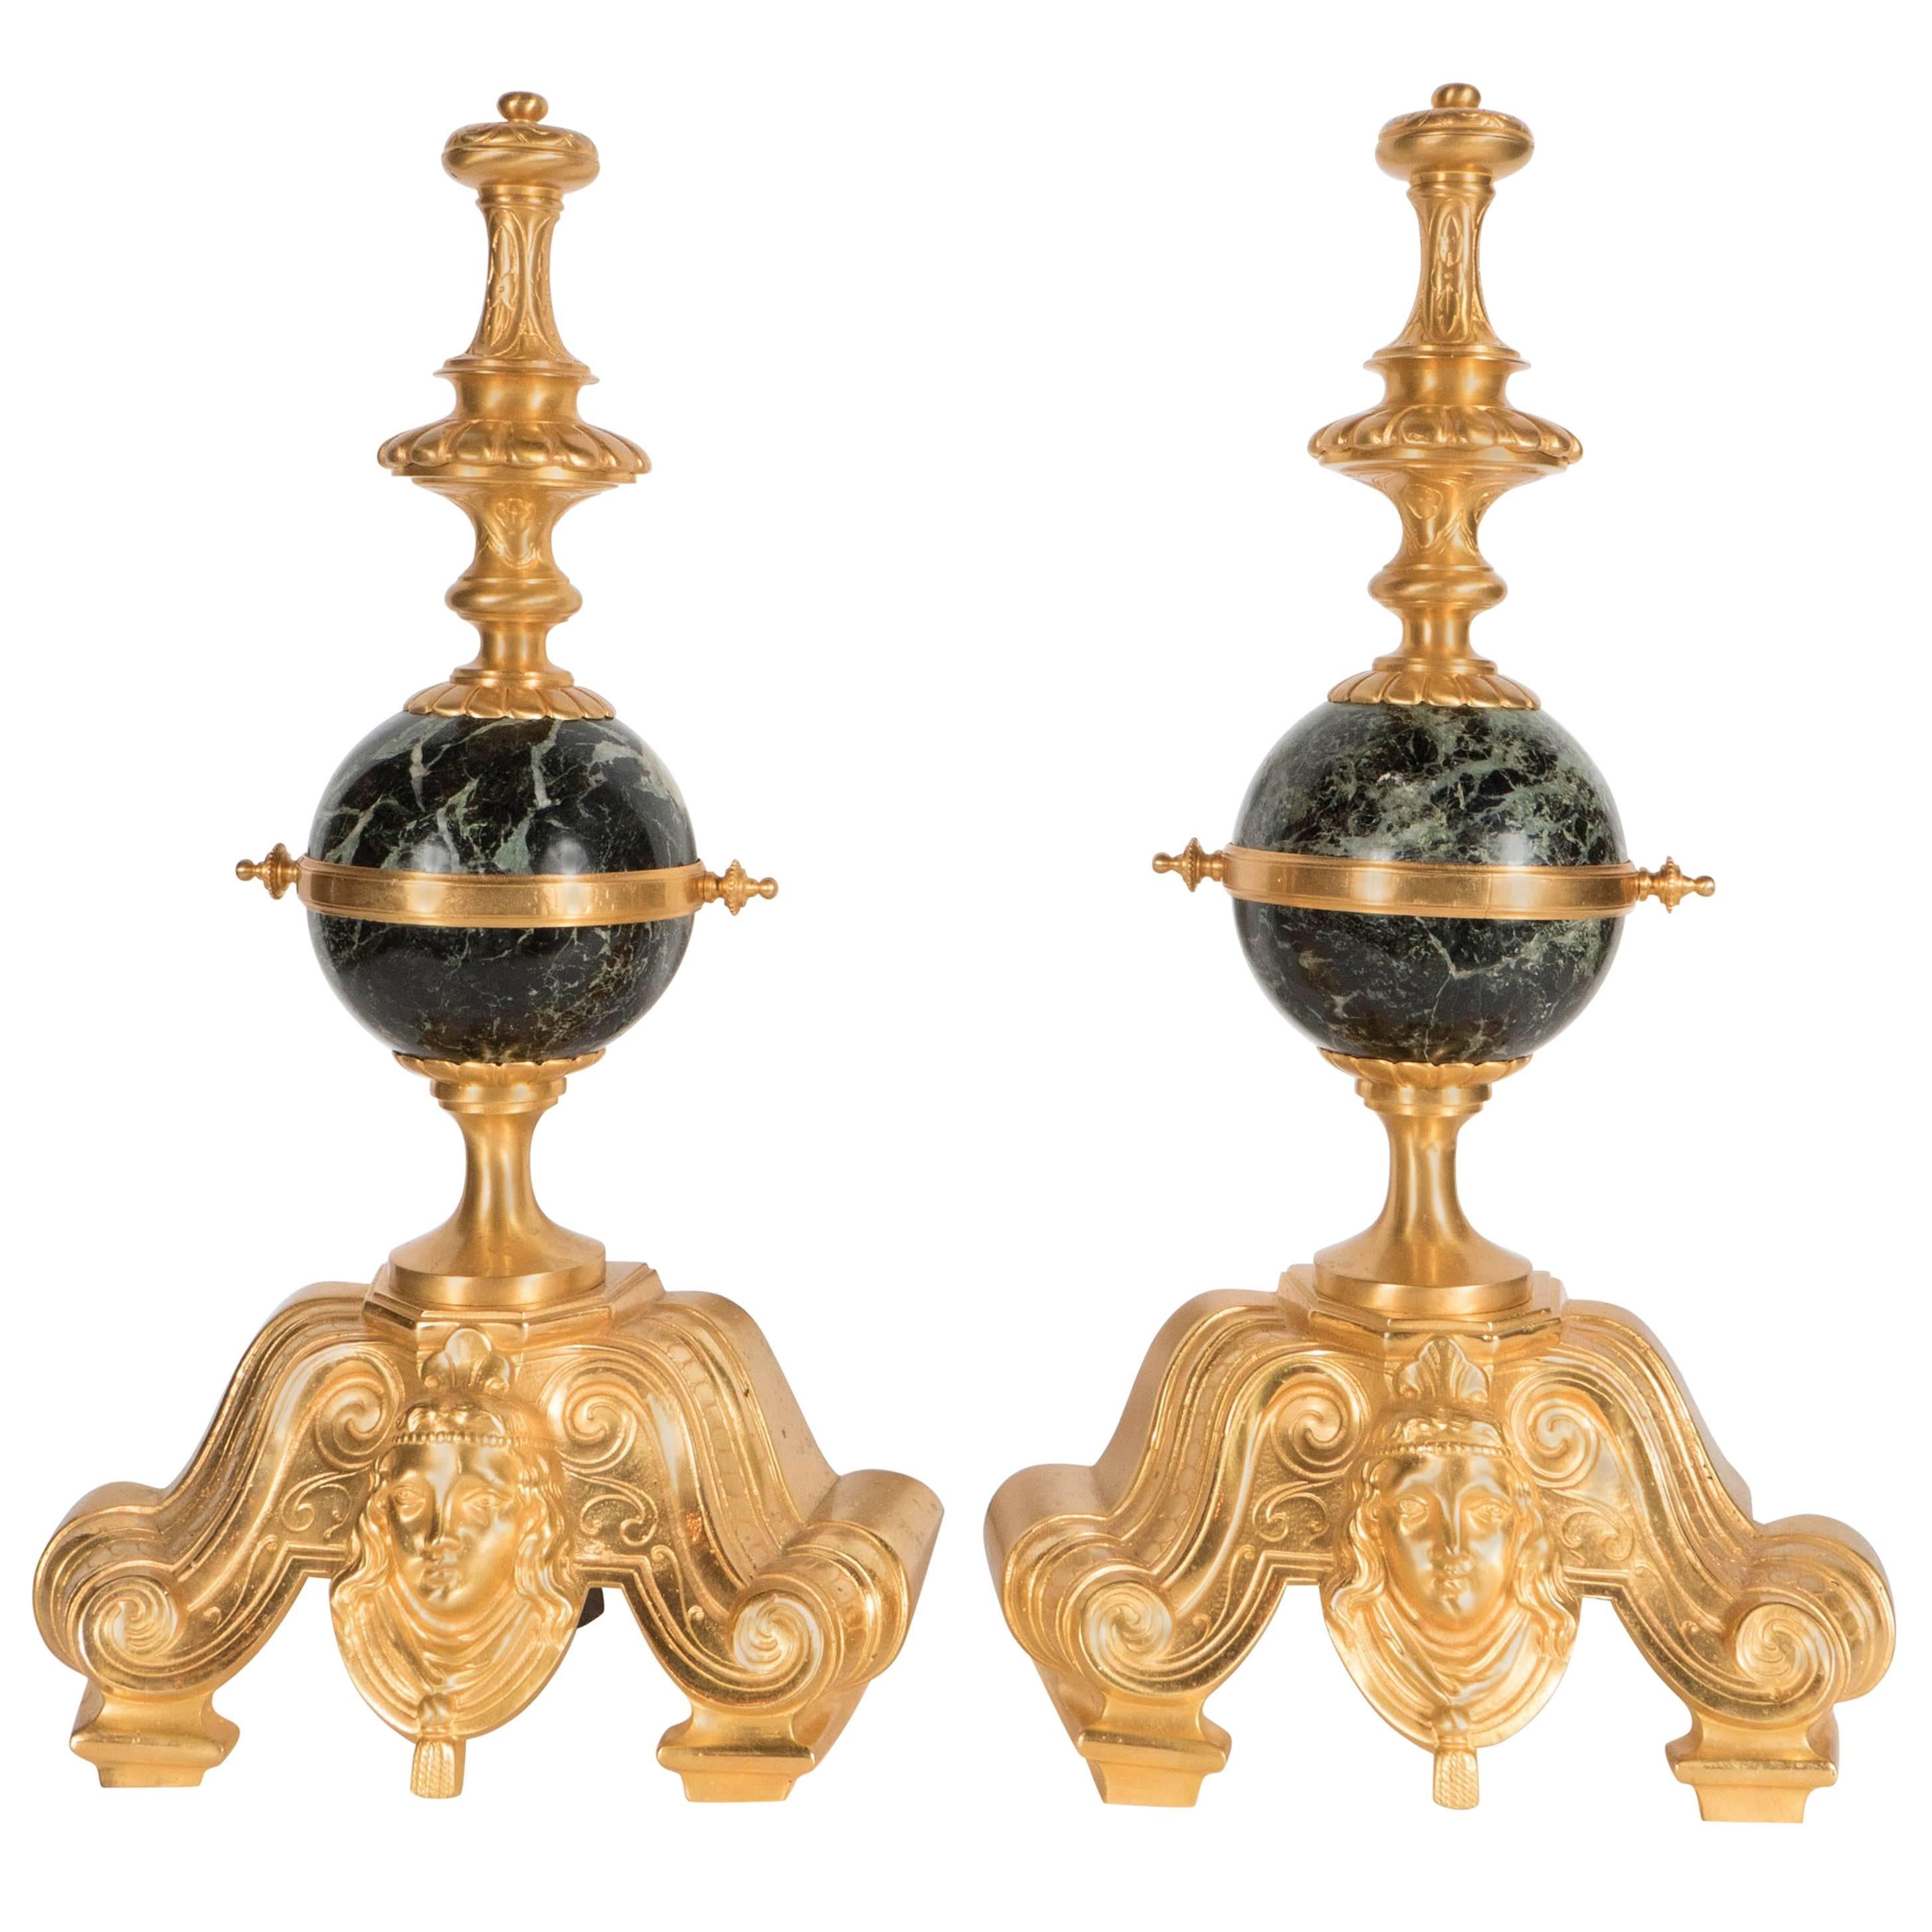 Exquisite Pair of Louis XV Andirons /Chenets in Gilded Bronze and Exotic Marble